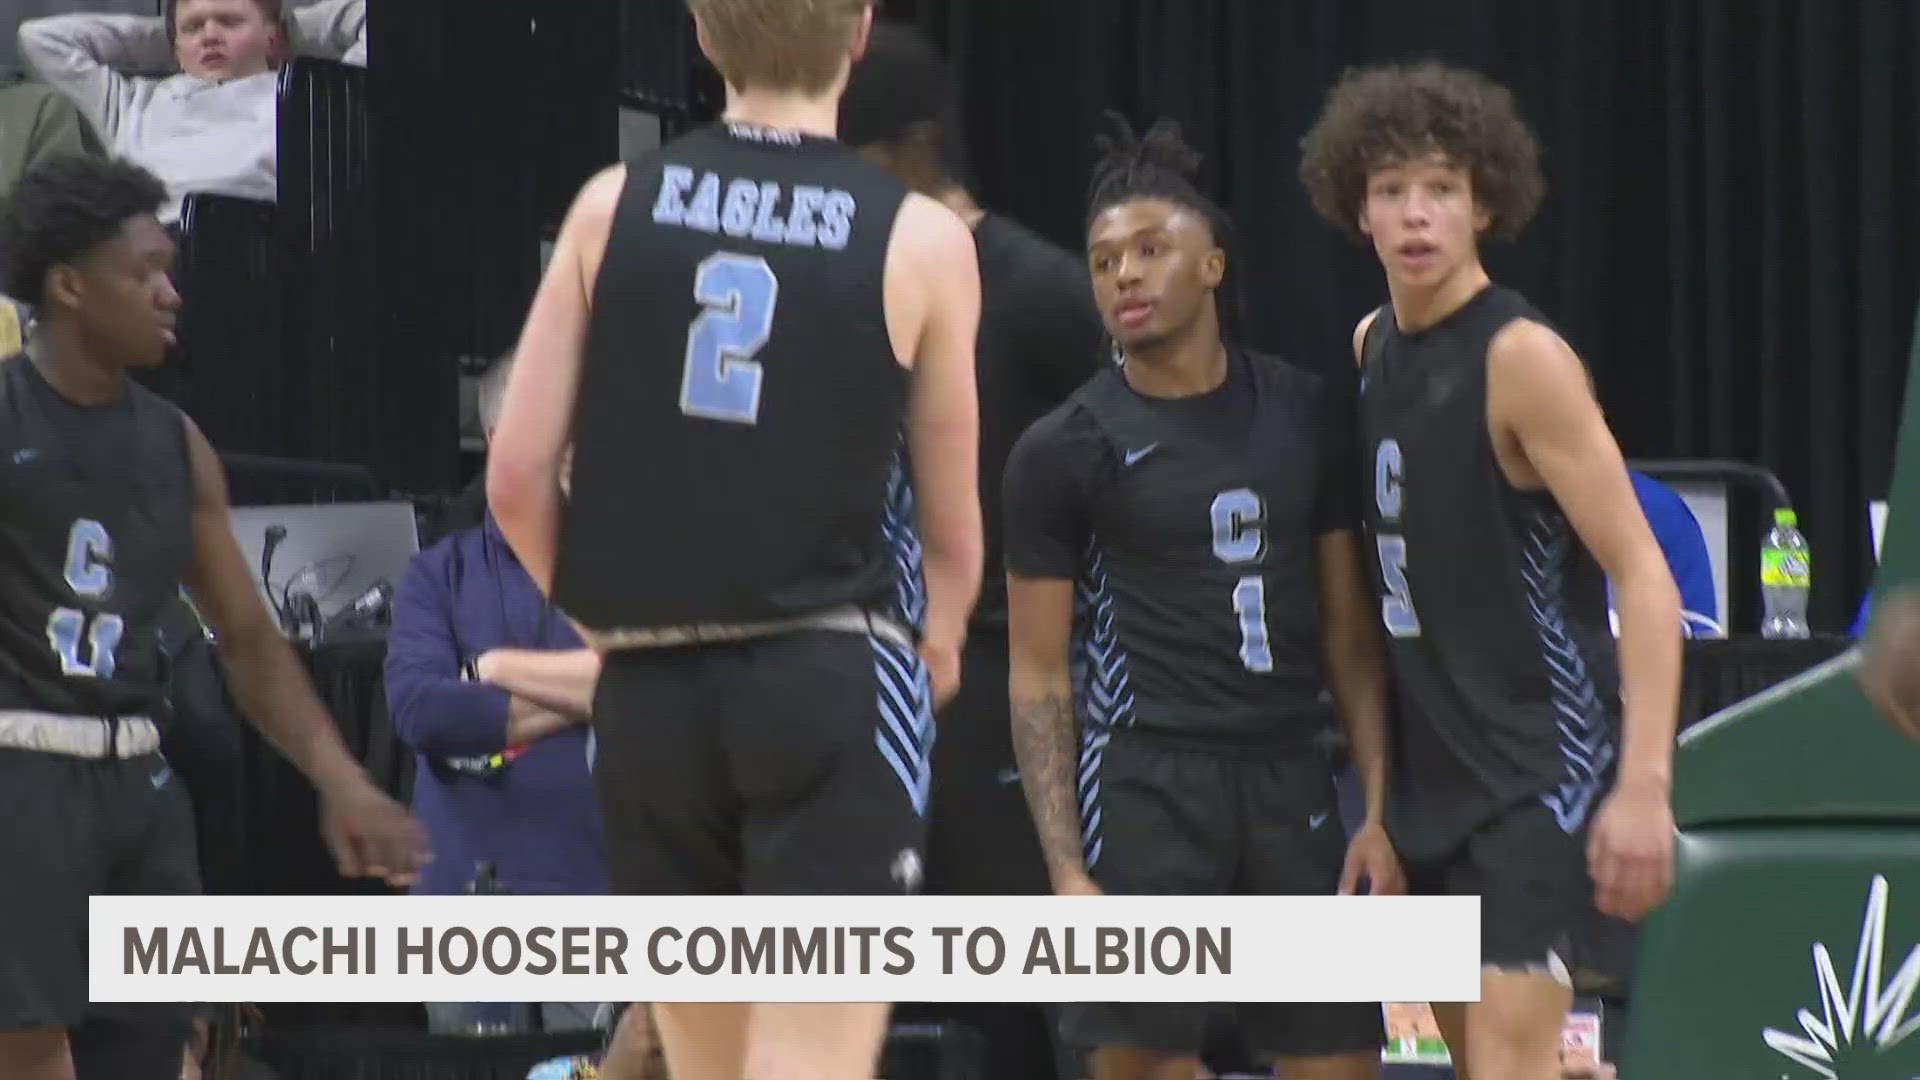 Malachi Hooser just announced his commitment to Albion. He averaged over 10 points per game this season.